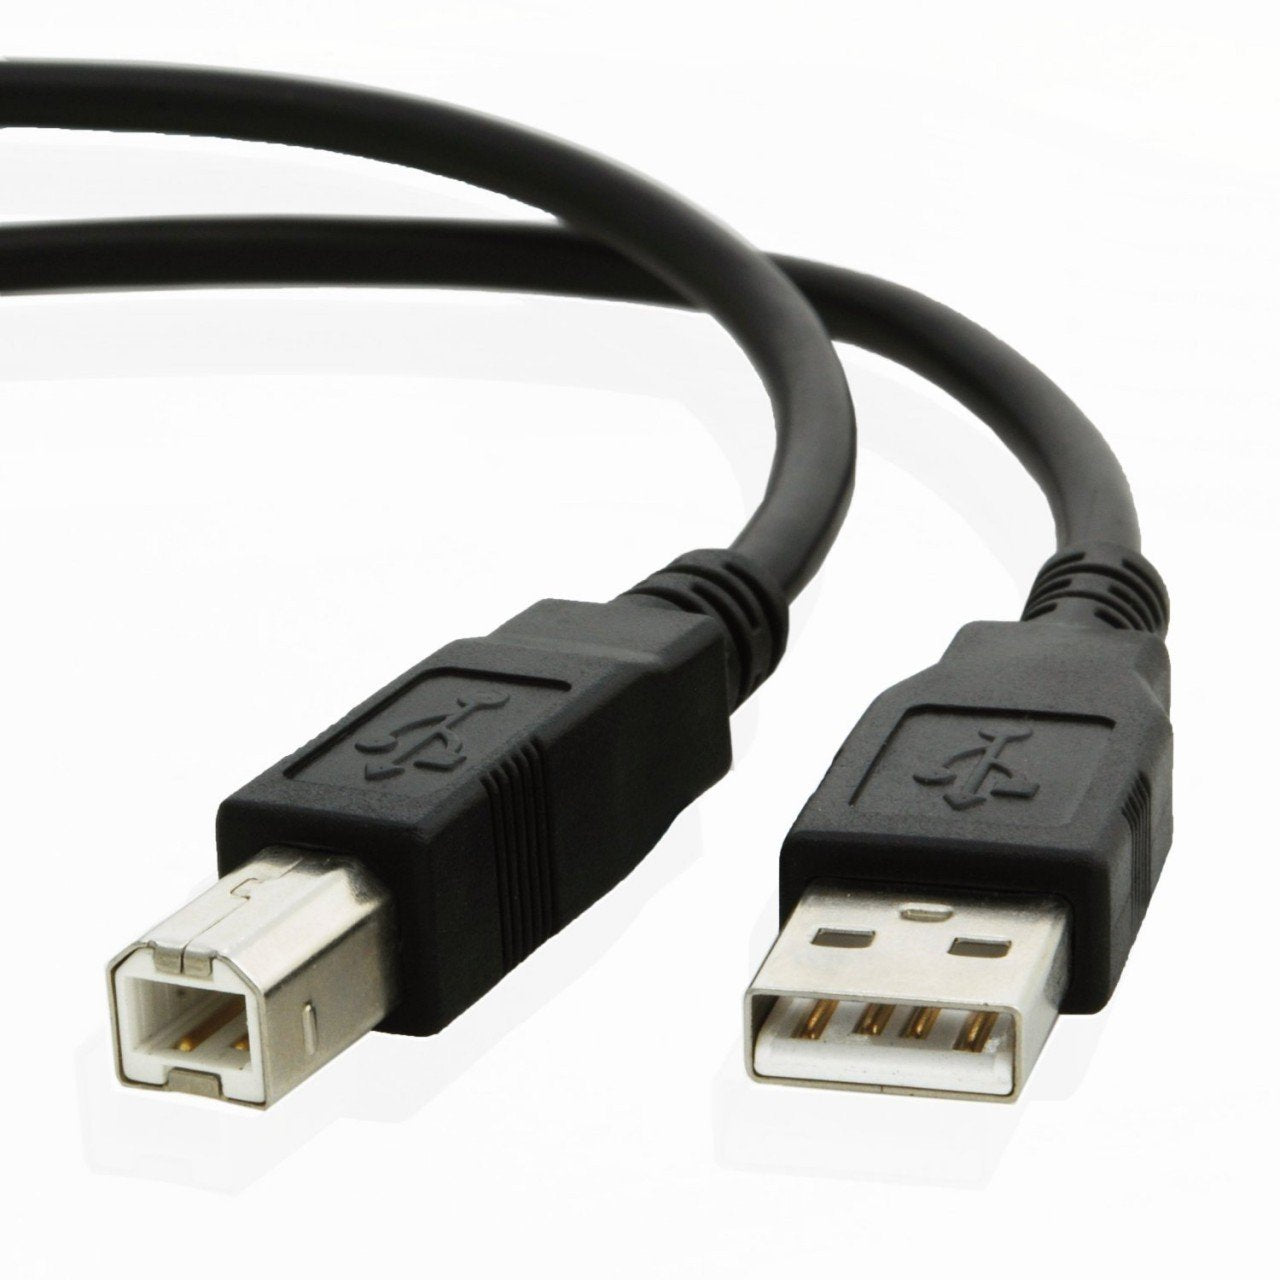 USB cable for Casio KEYBOARD CTK-6250